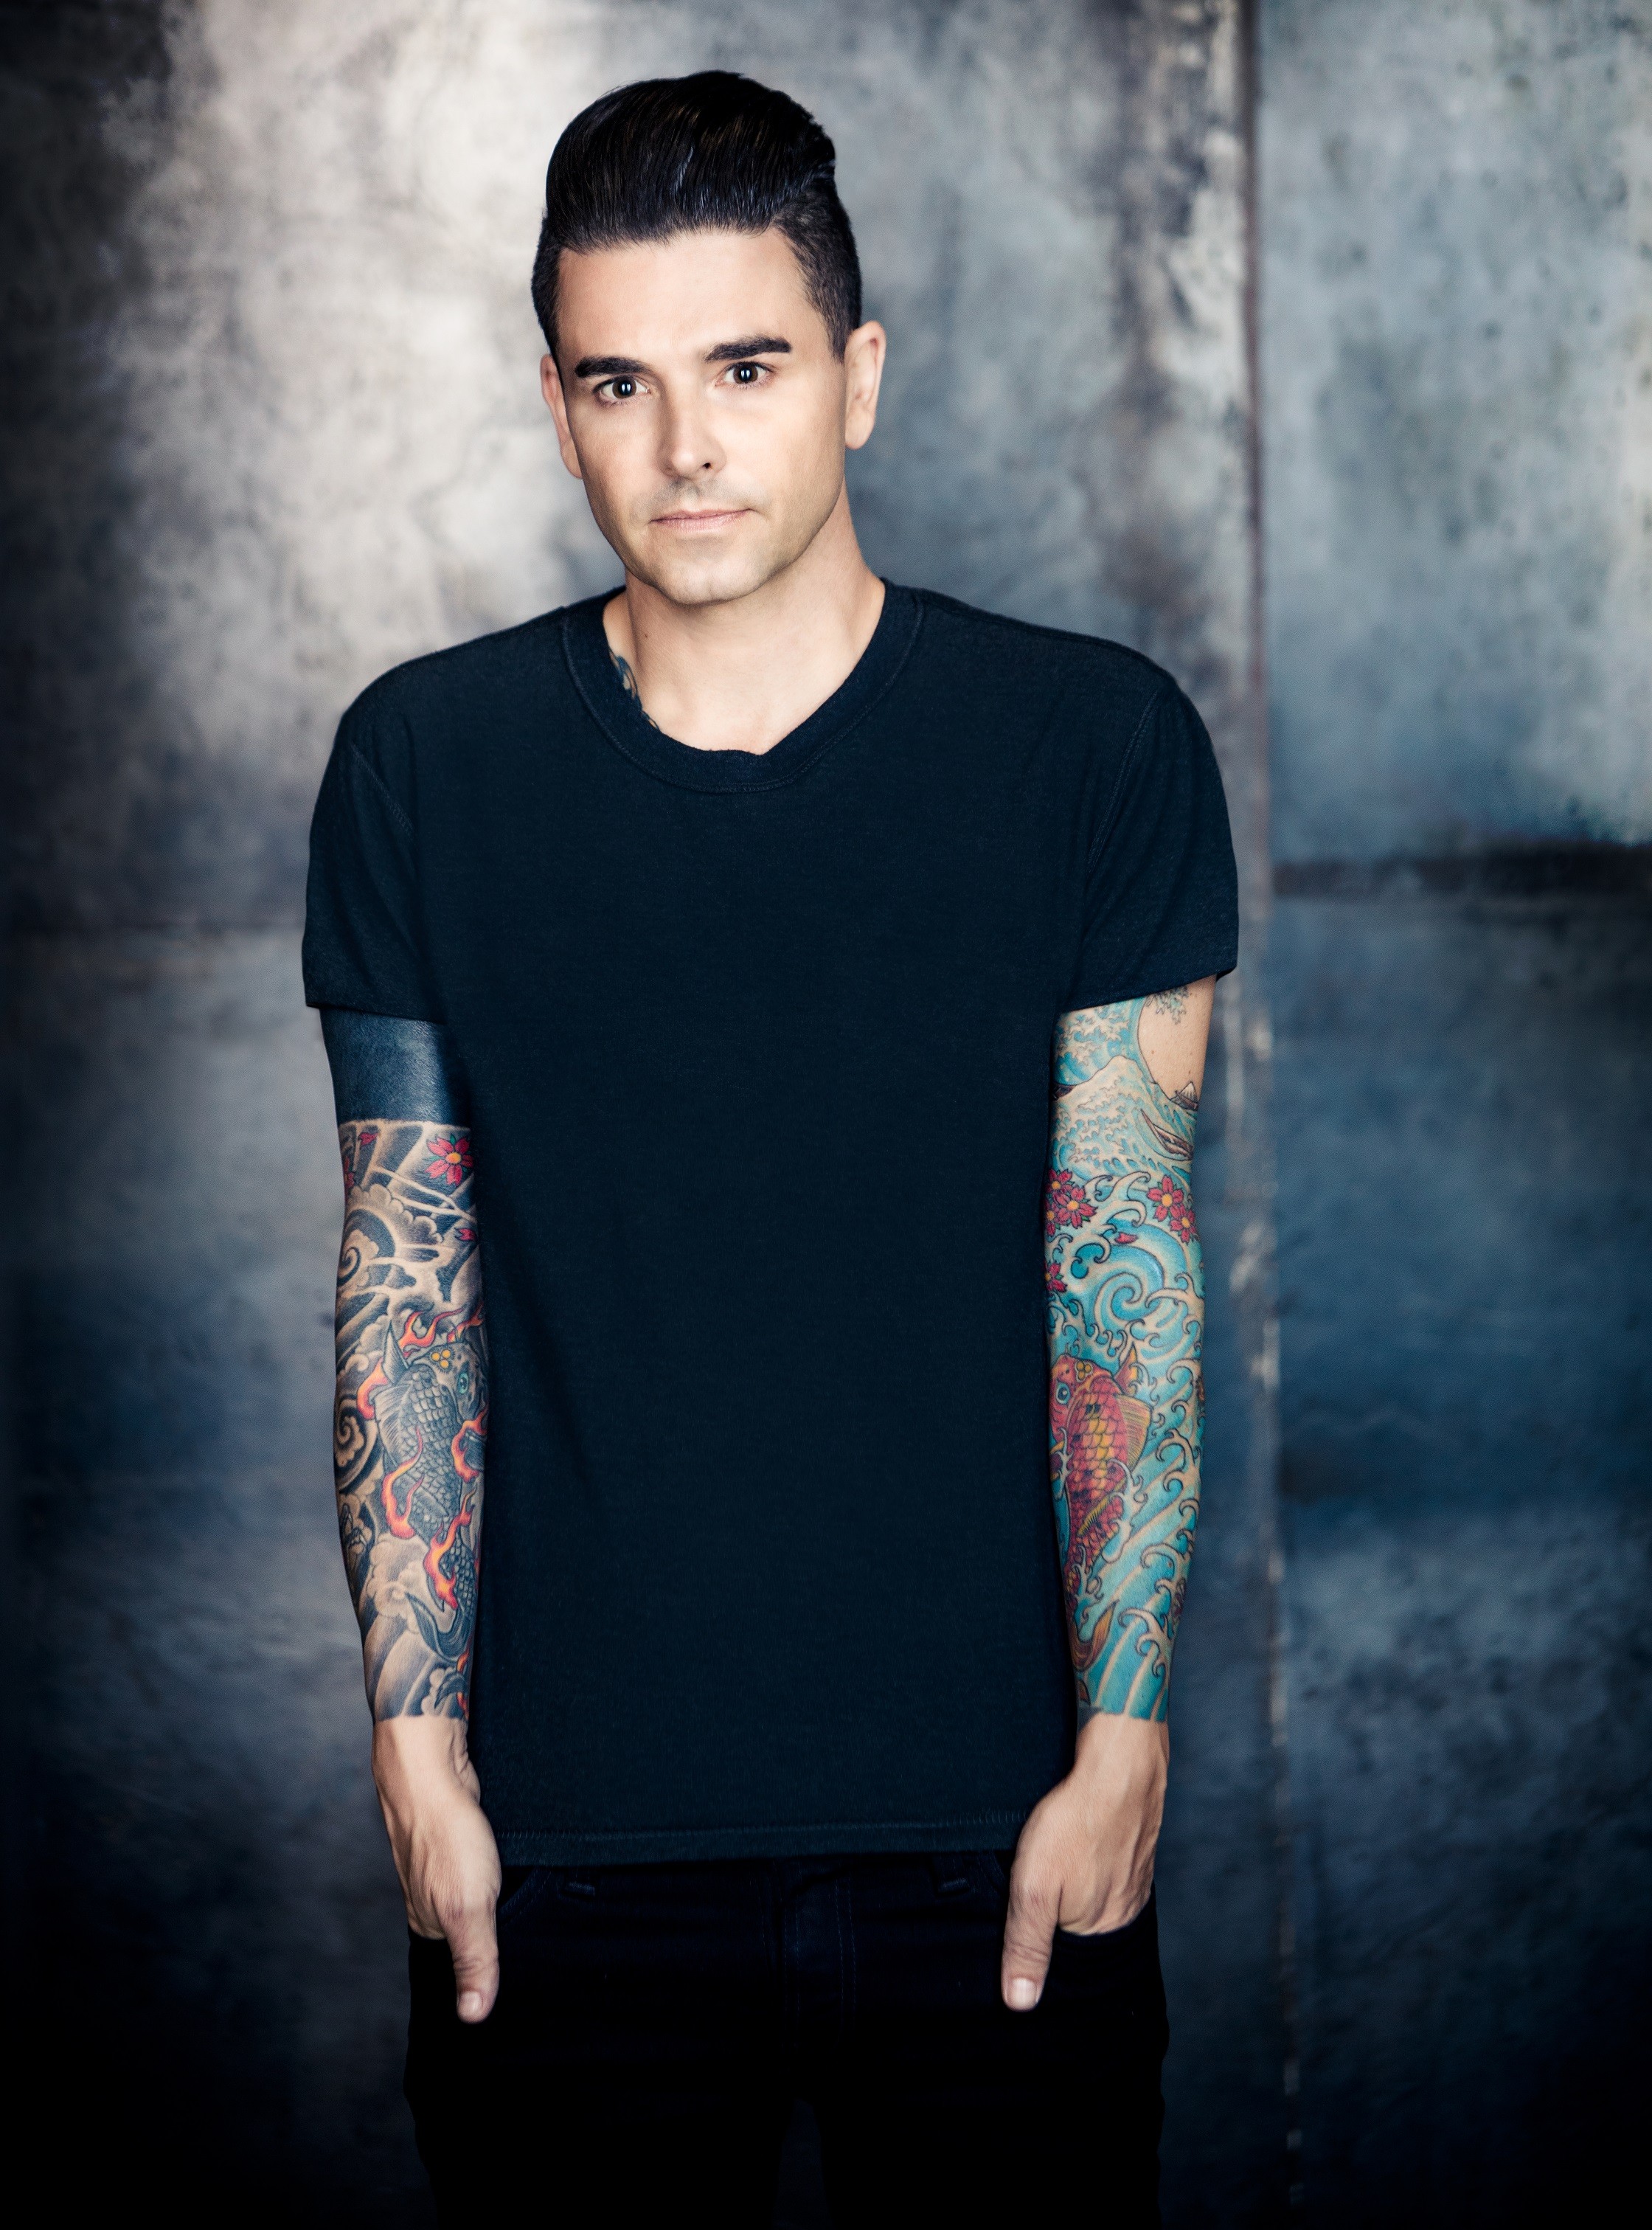 Dashboard Confessional's Chris Carrabba Provides a TrackbyTrack